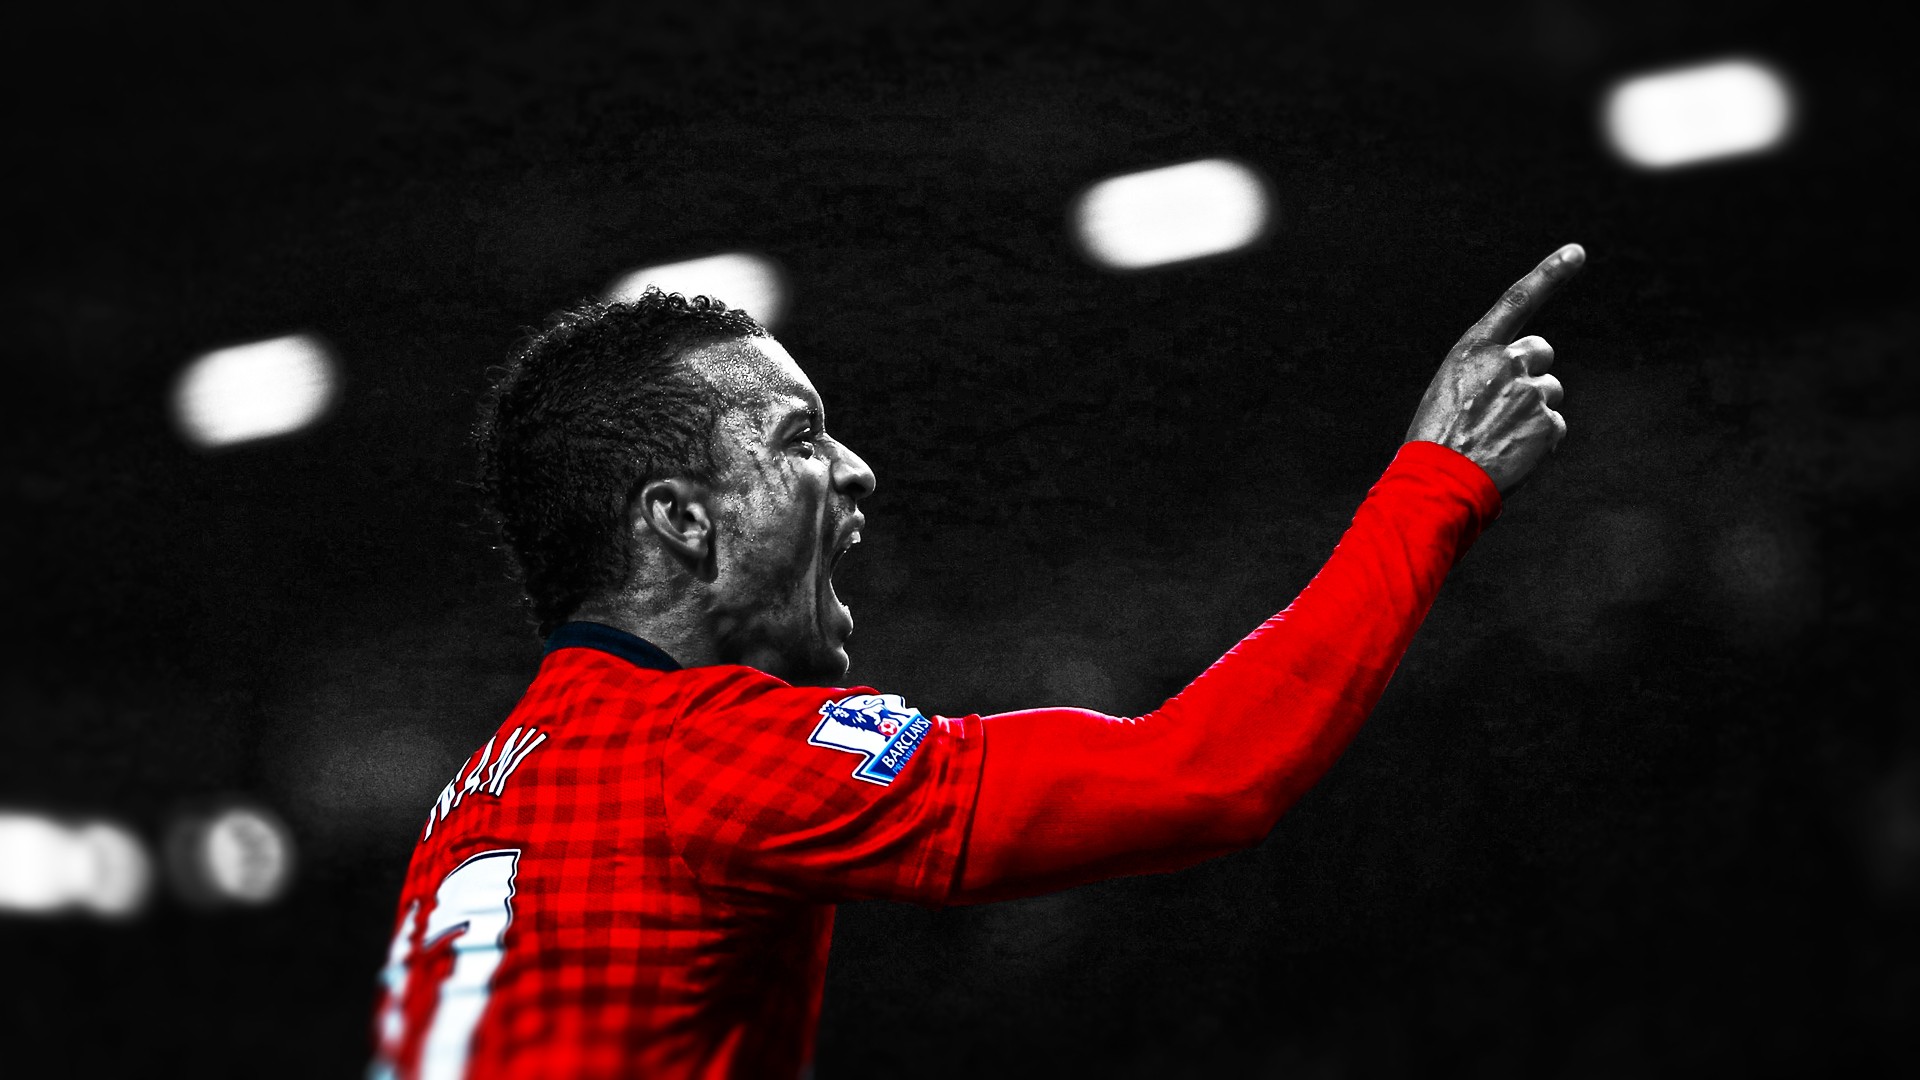 Manchester United Wallpapers Full Hd Free Download - Nani - HD Wallpaper 